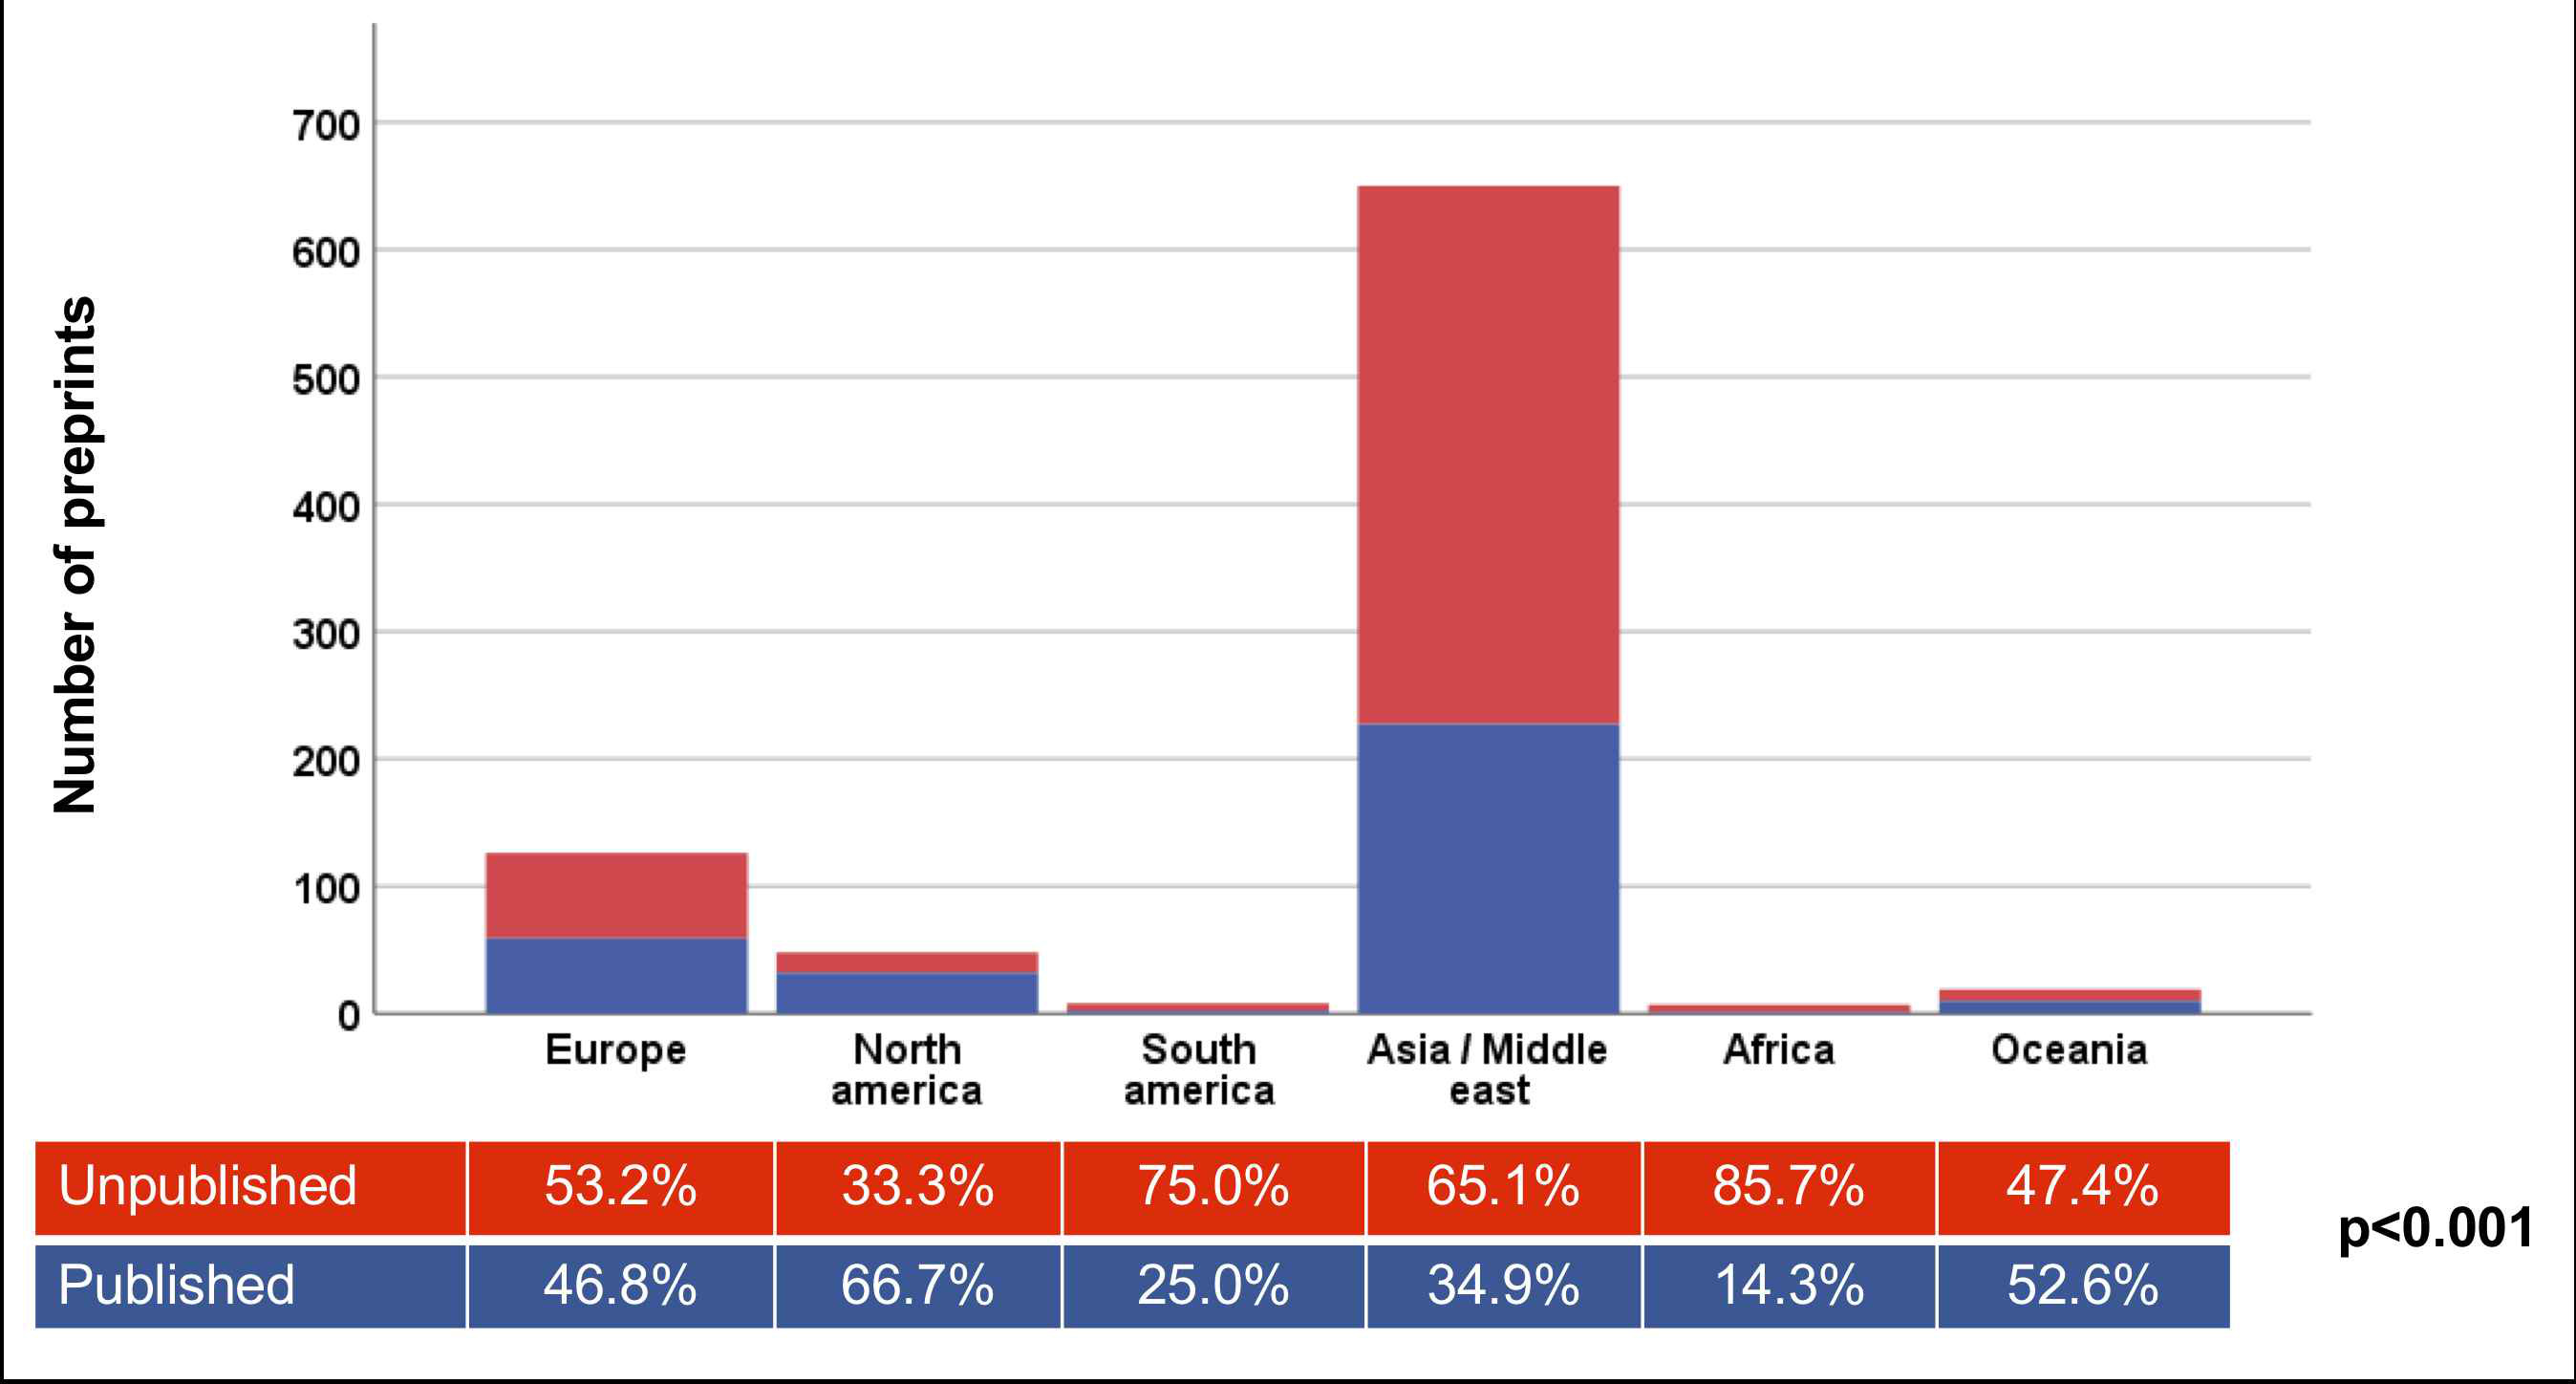 Fig. 3 
          Subsequent definitive publication according to geographical origin. The bar chart depicts the number (%) of subsequently published preprints (blue) and unpublished preprints (red) according to geographical origin.
        